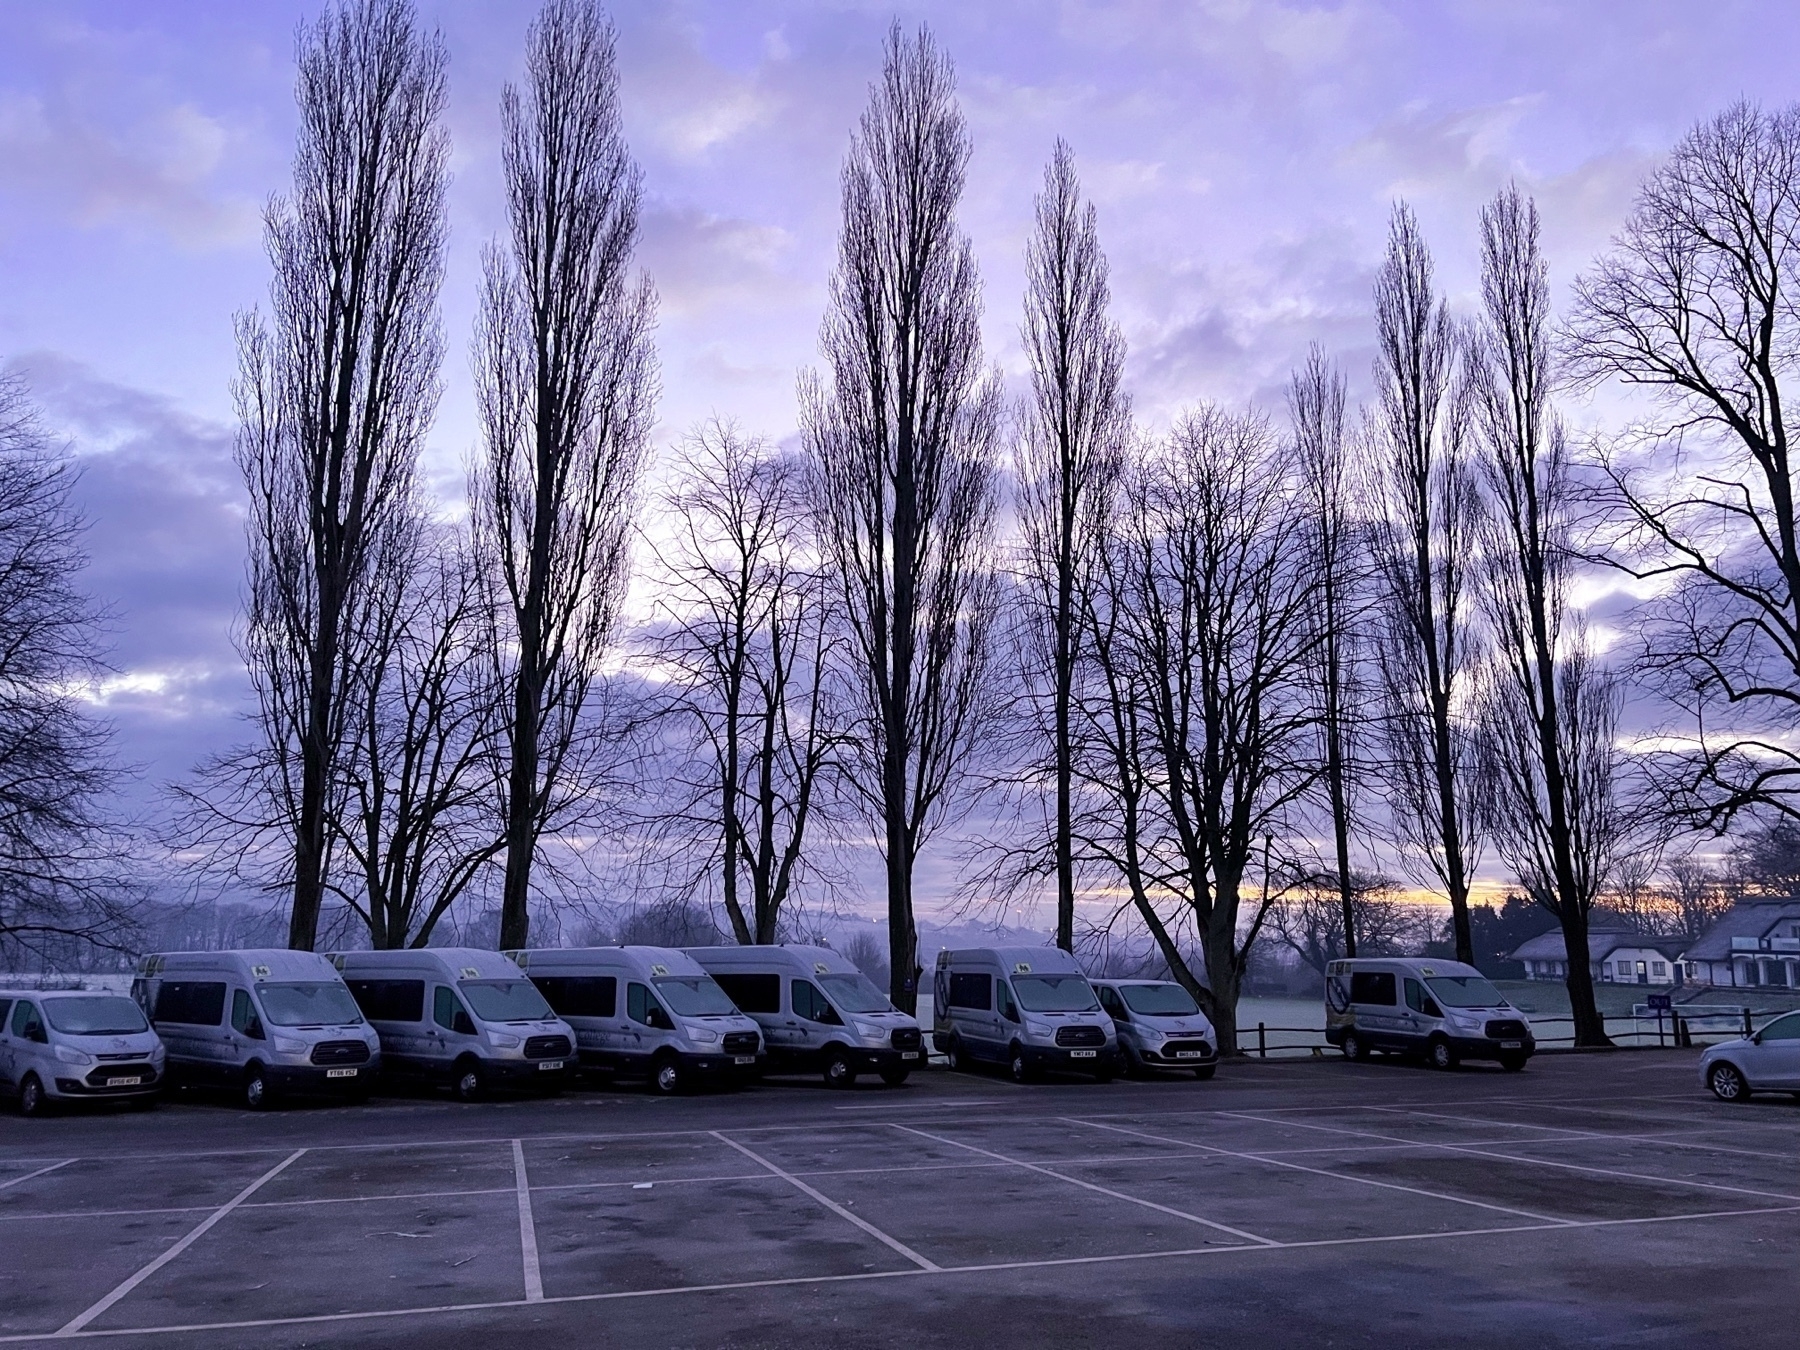 Trees and college vans just pre-dawn at Lancing College. 